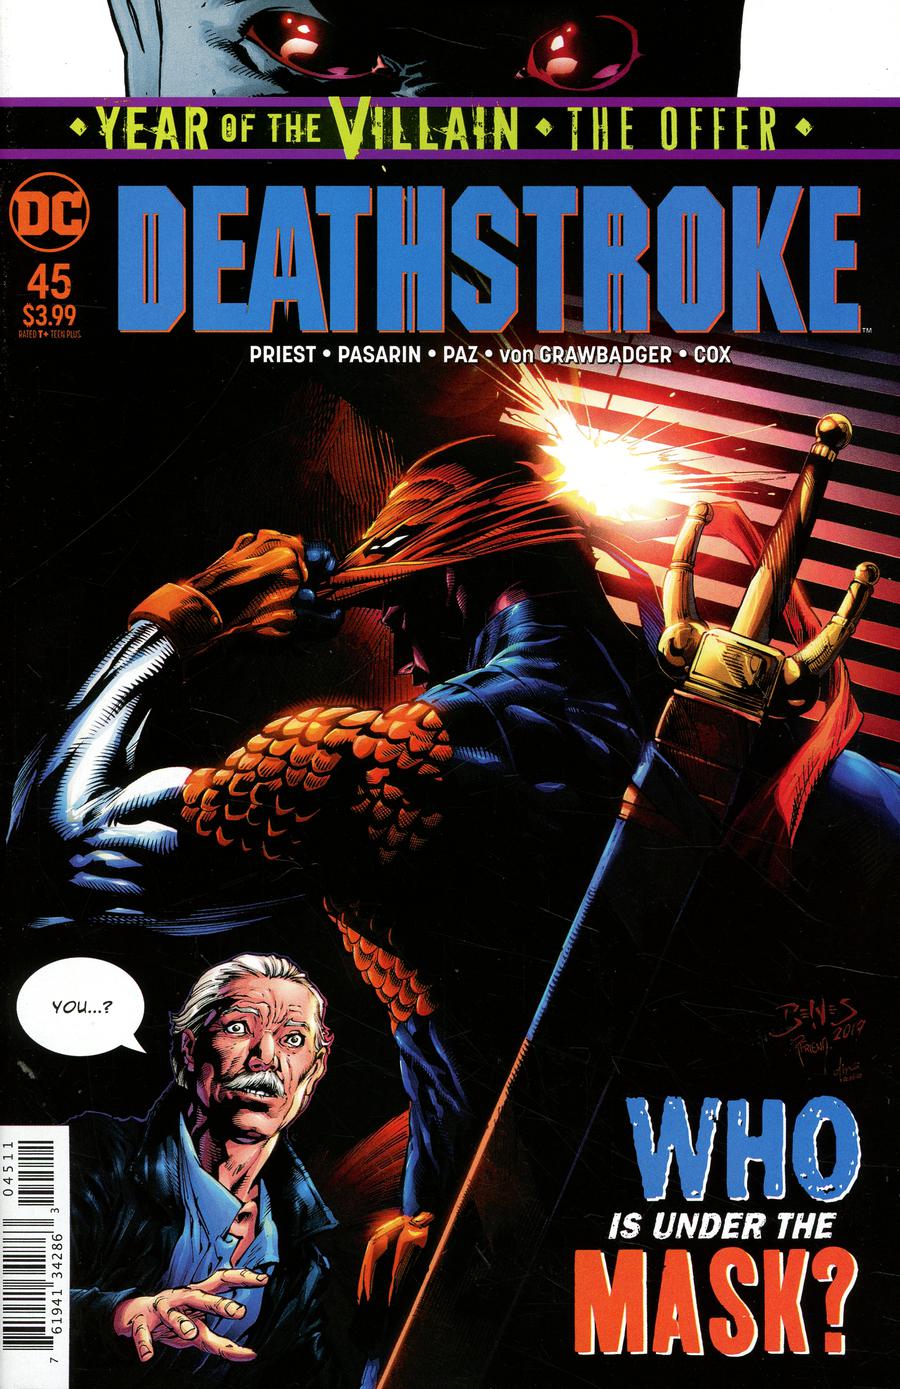 Deathstroke Vol 4 #45 Cover A Regular Ed Benes & Richard Friend Cover (Year Of The Villain The Offer Tie-In)